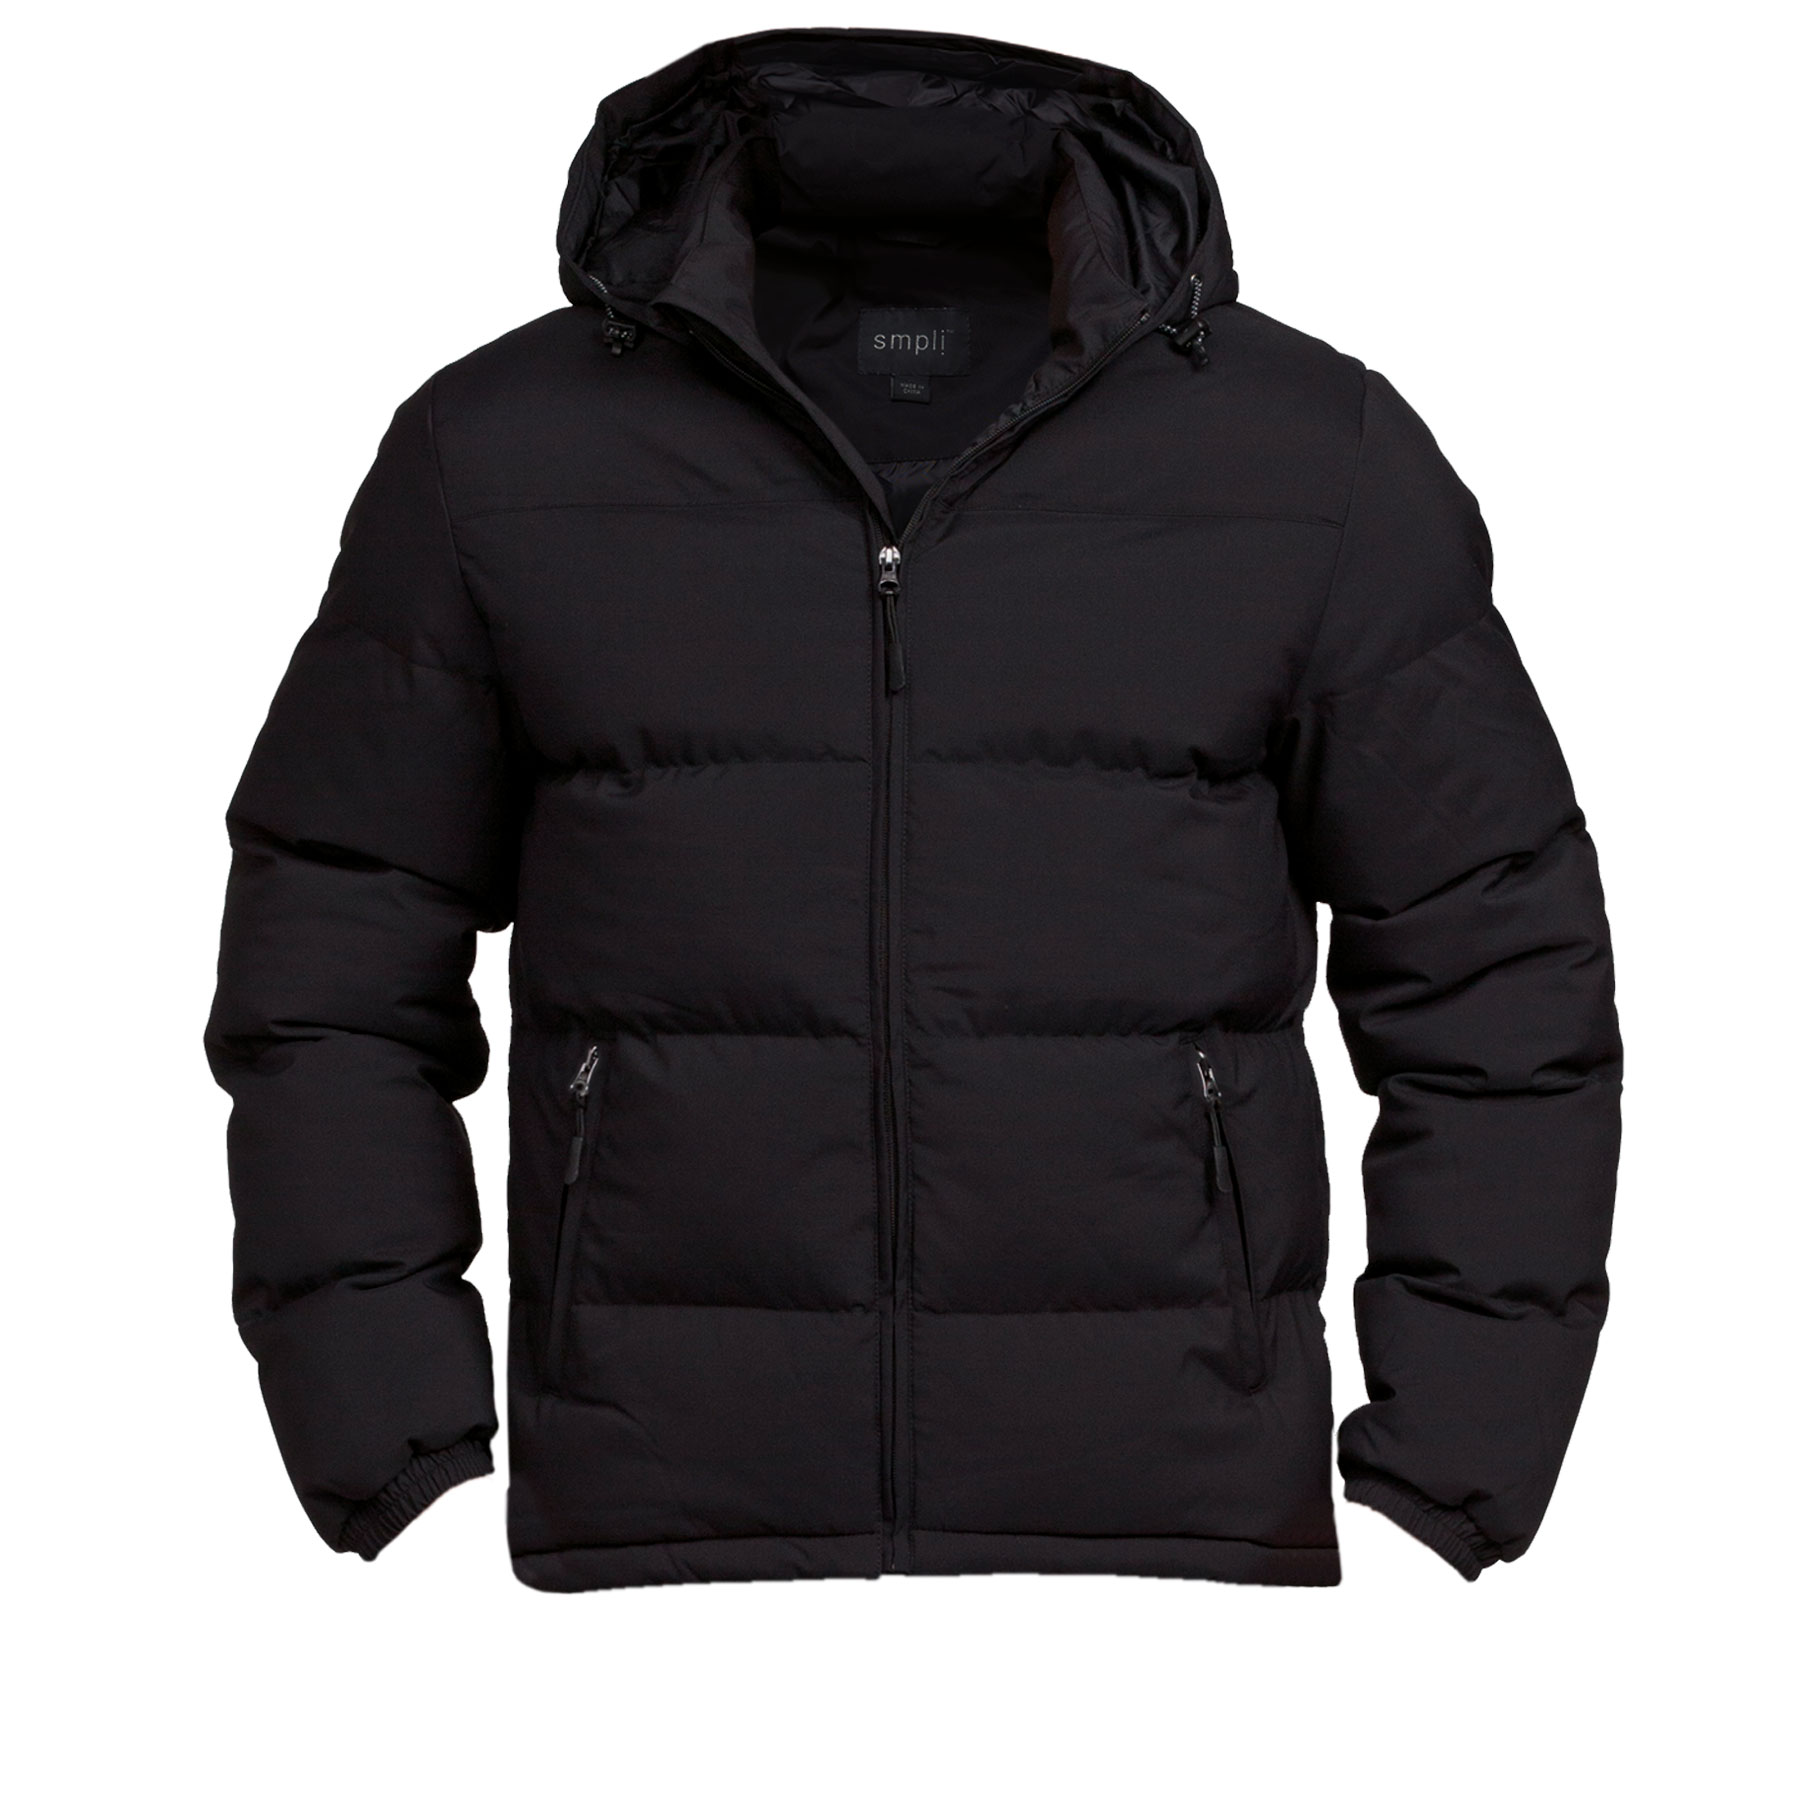 Gear For Life Edge puffa Jacket  -Gear For Life